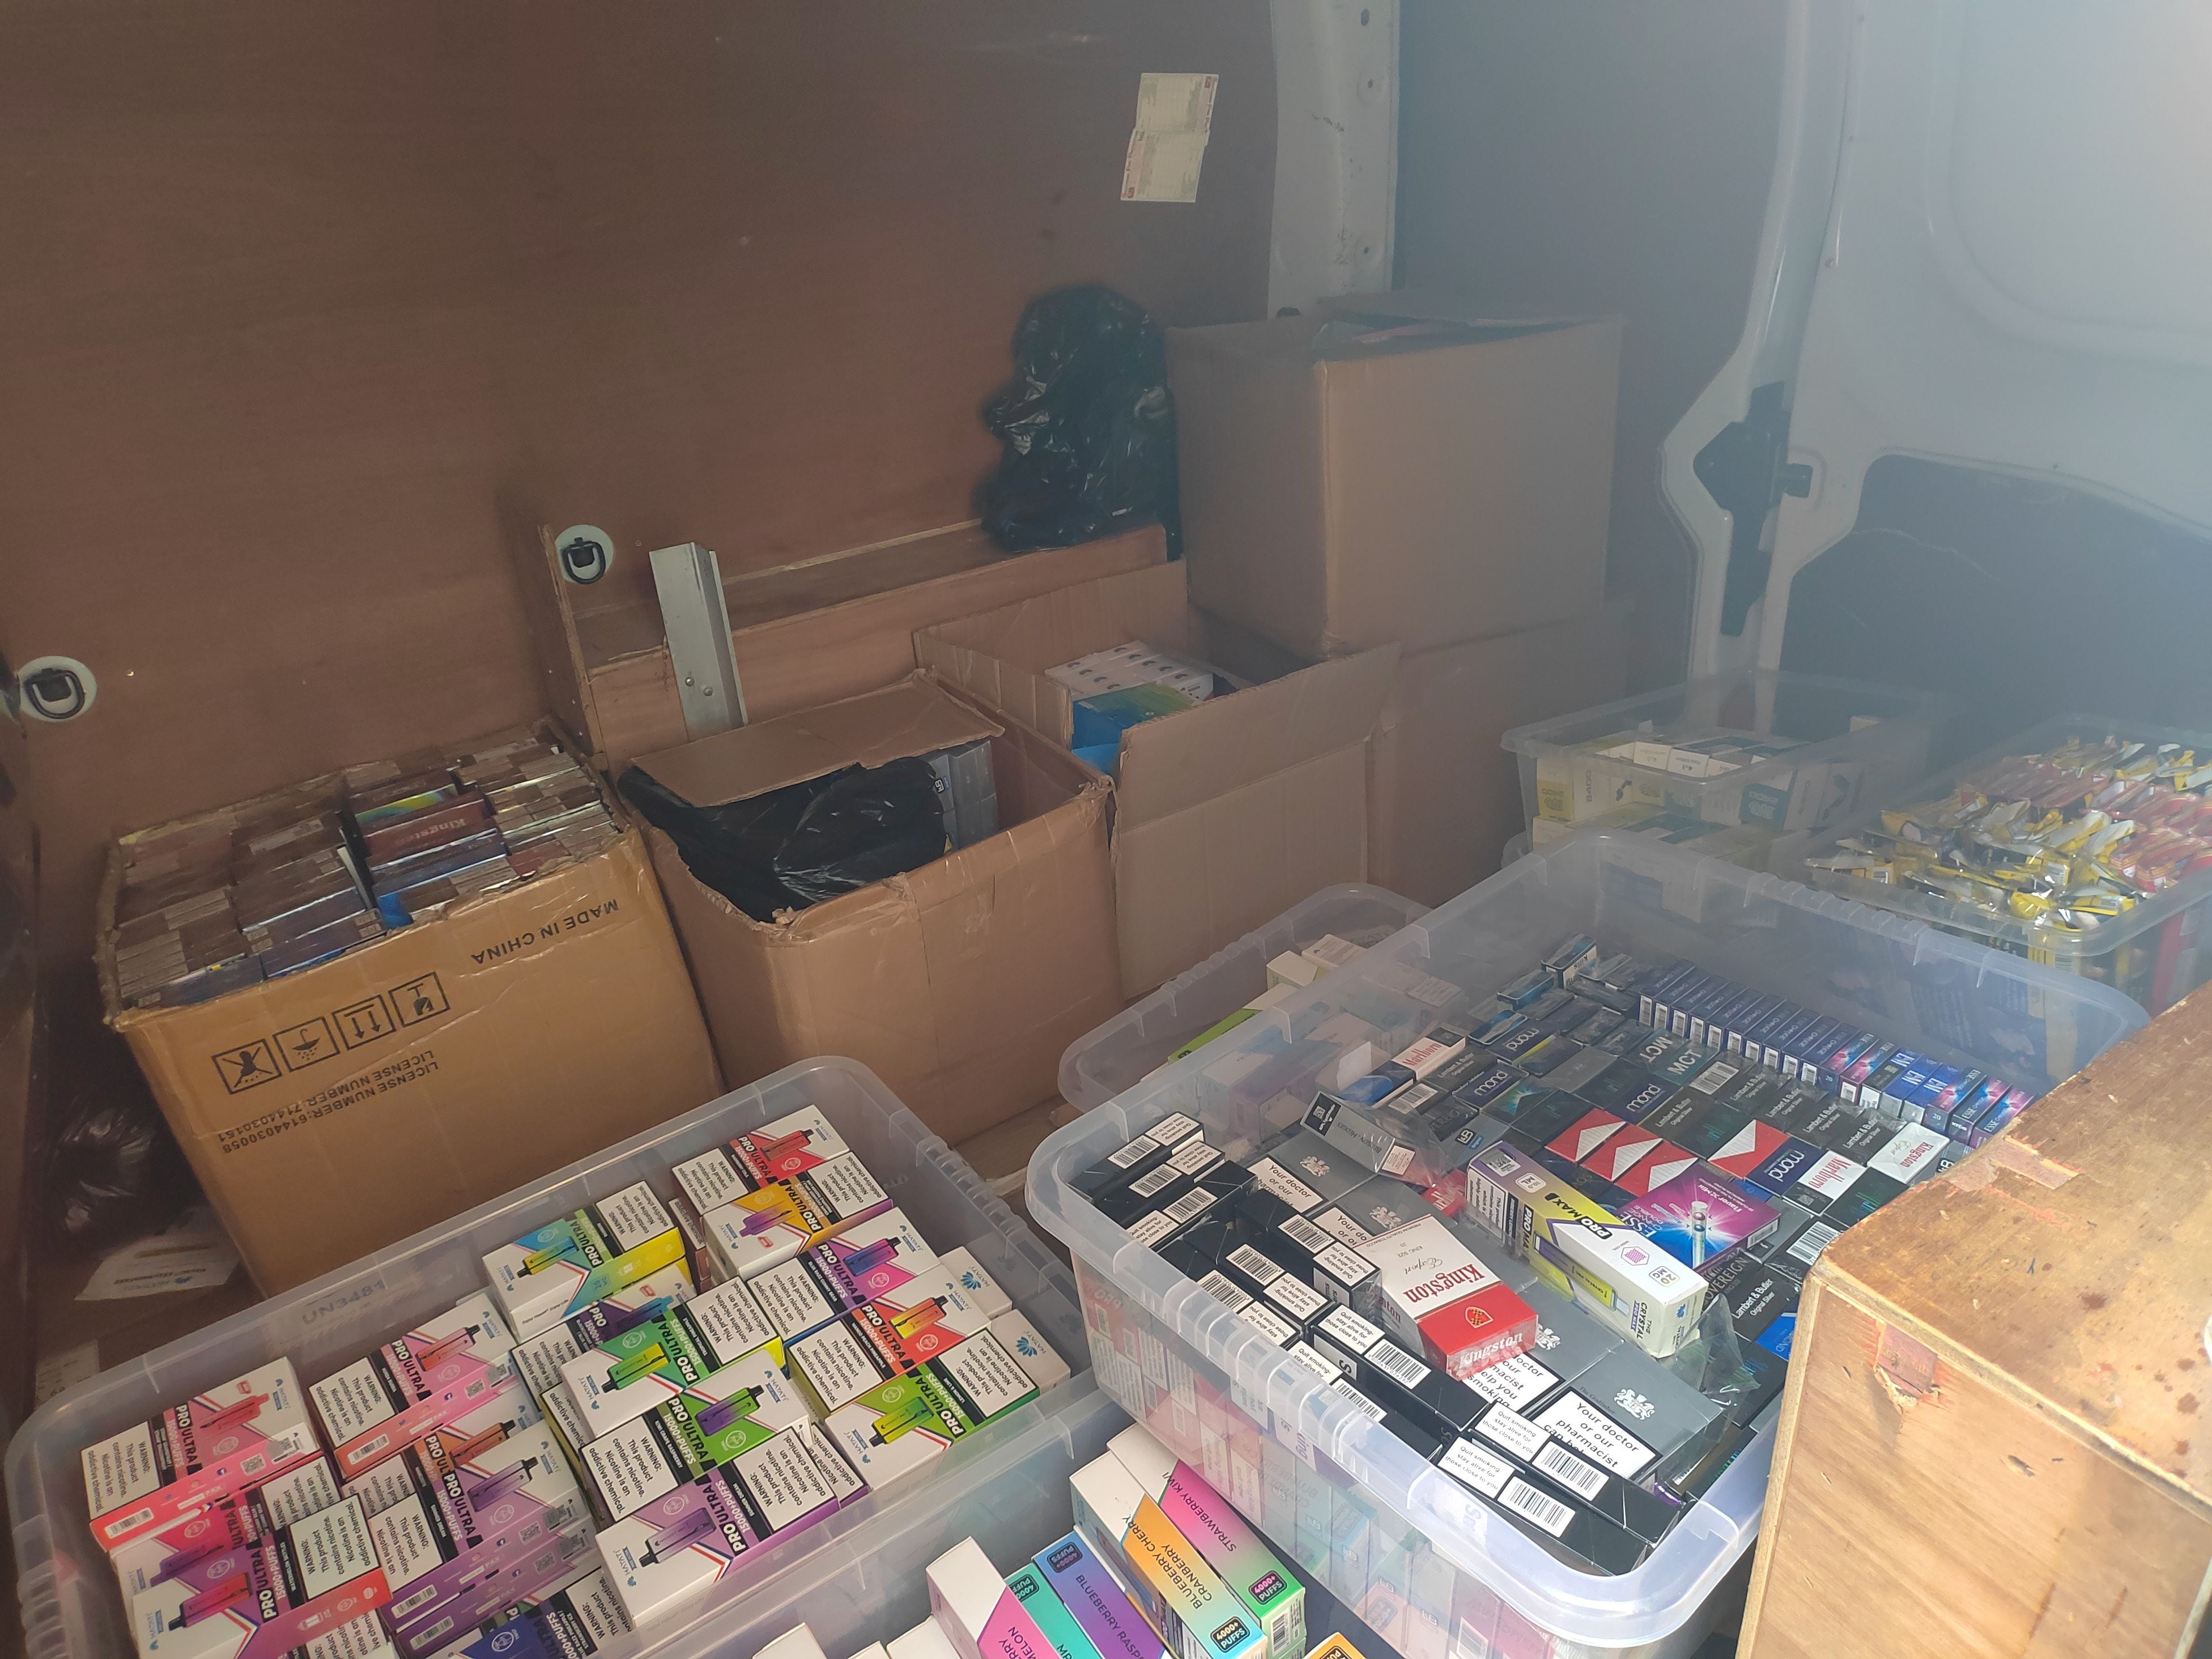 Halesowen shop ordered to close for three months for selling £58,000 worth of illegal cigarettes and vapes